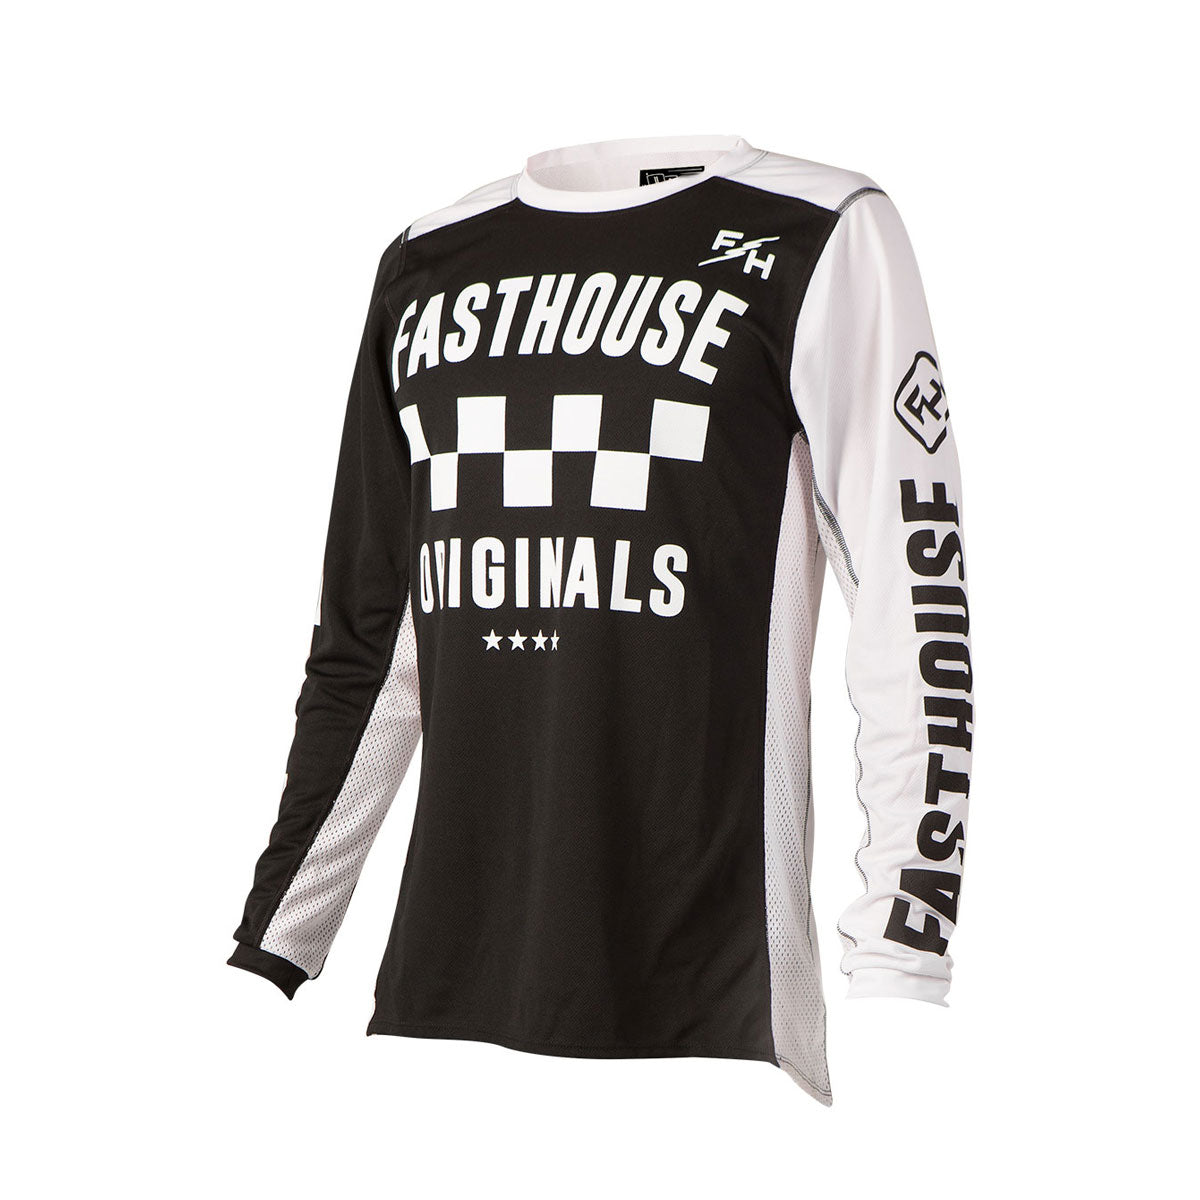 Fasthouse - Checkers OG Youth Jersey - Black